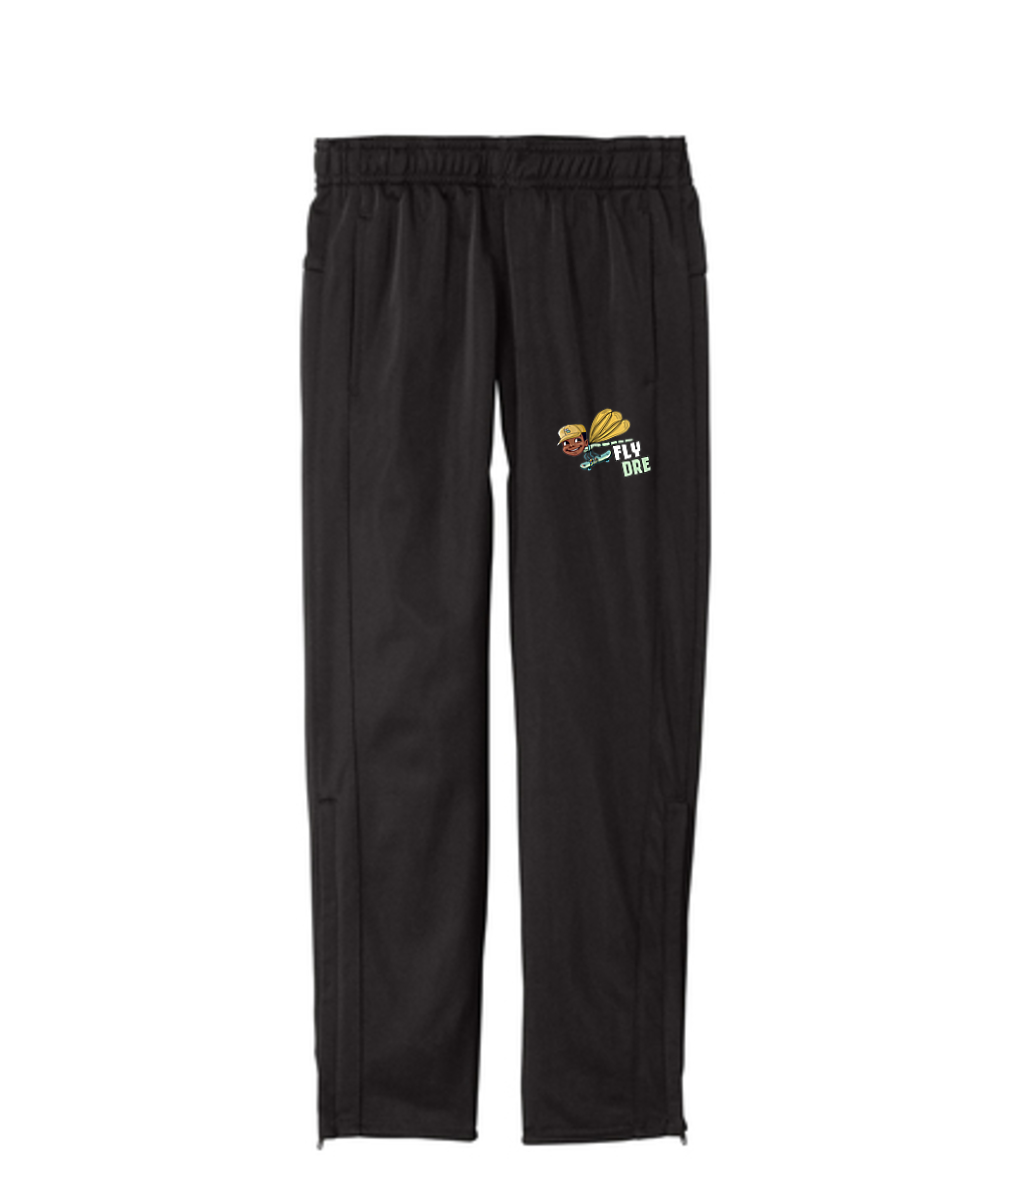 Fly Dre Embroidered Sport-Tek ® Youth Tricot Track Jogger or Similar